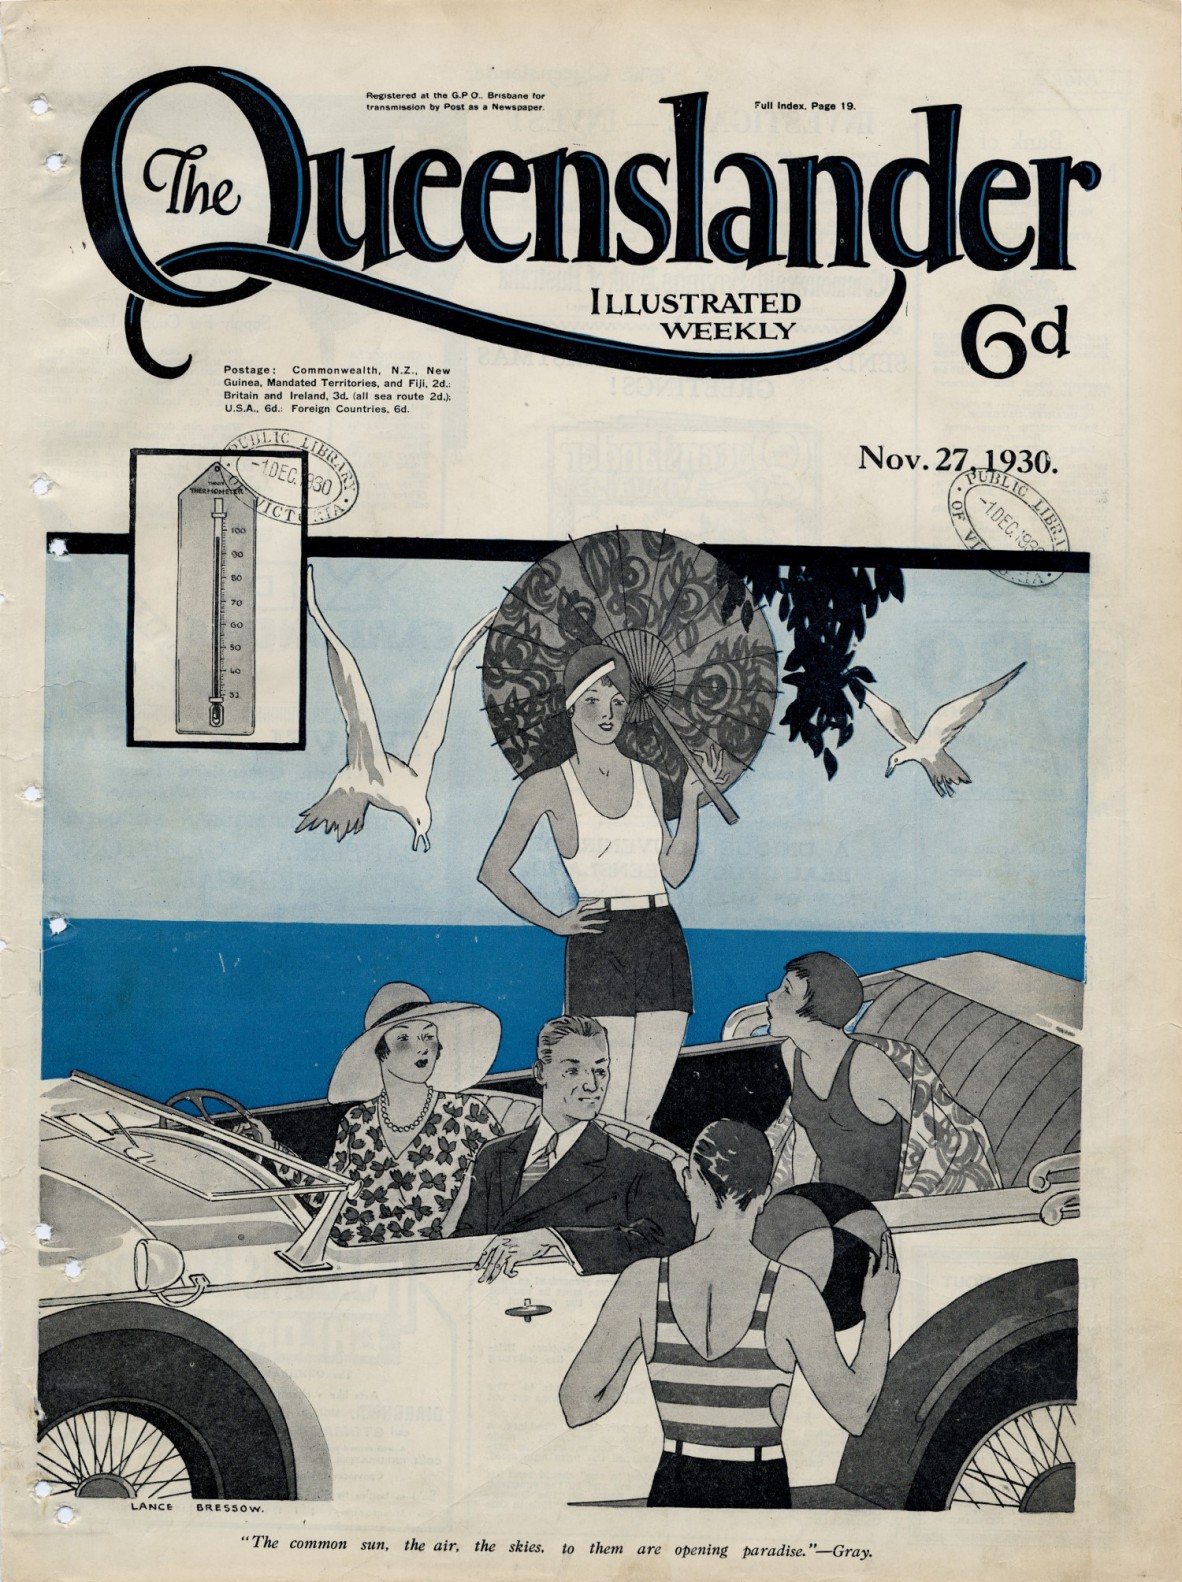 Illustrated front cover of the newspaper The Queenslander 27 November 1930